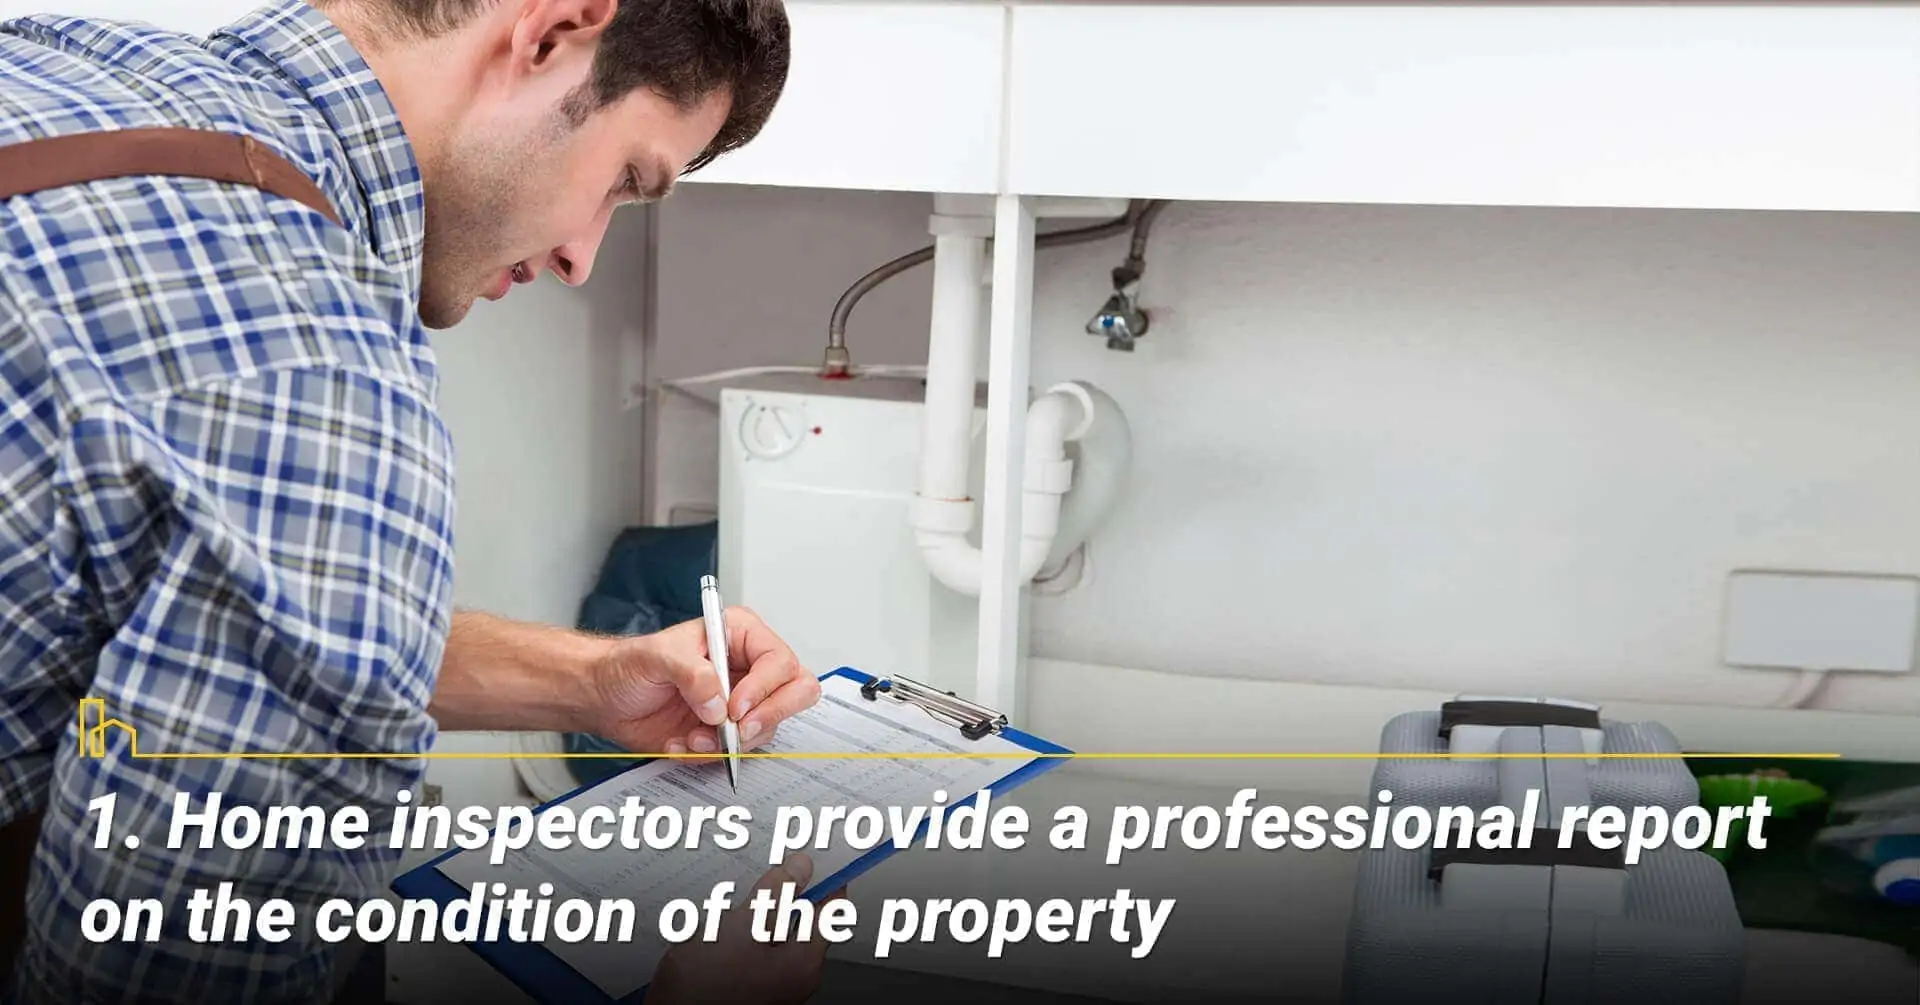 Home inspectors provide a professional report on the condition of the property, inspector report provides detail information on the property